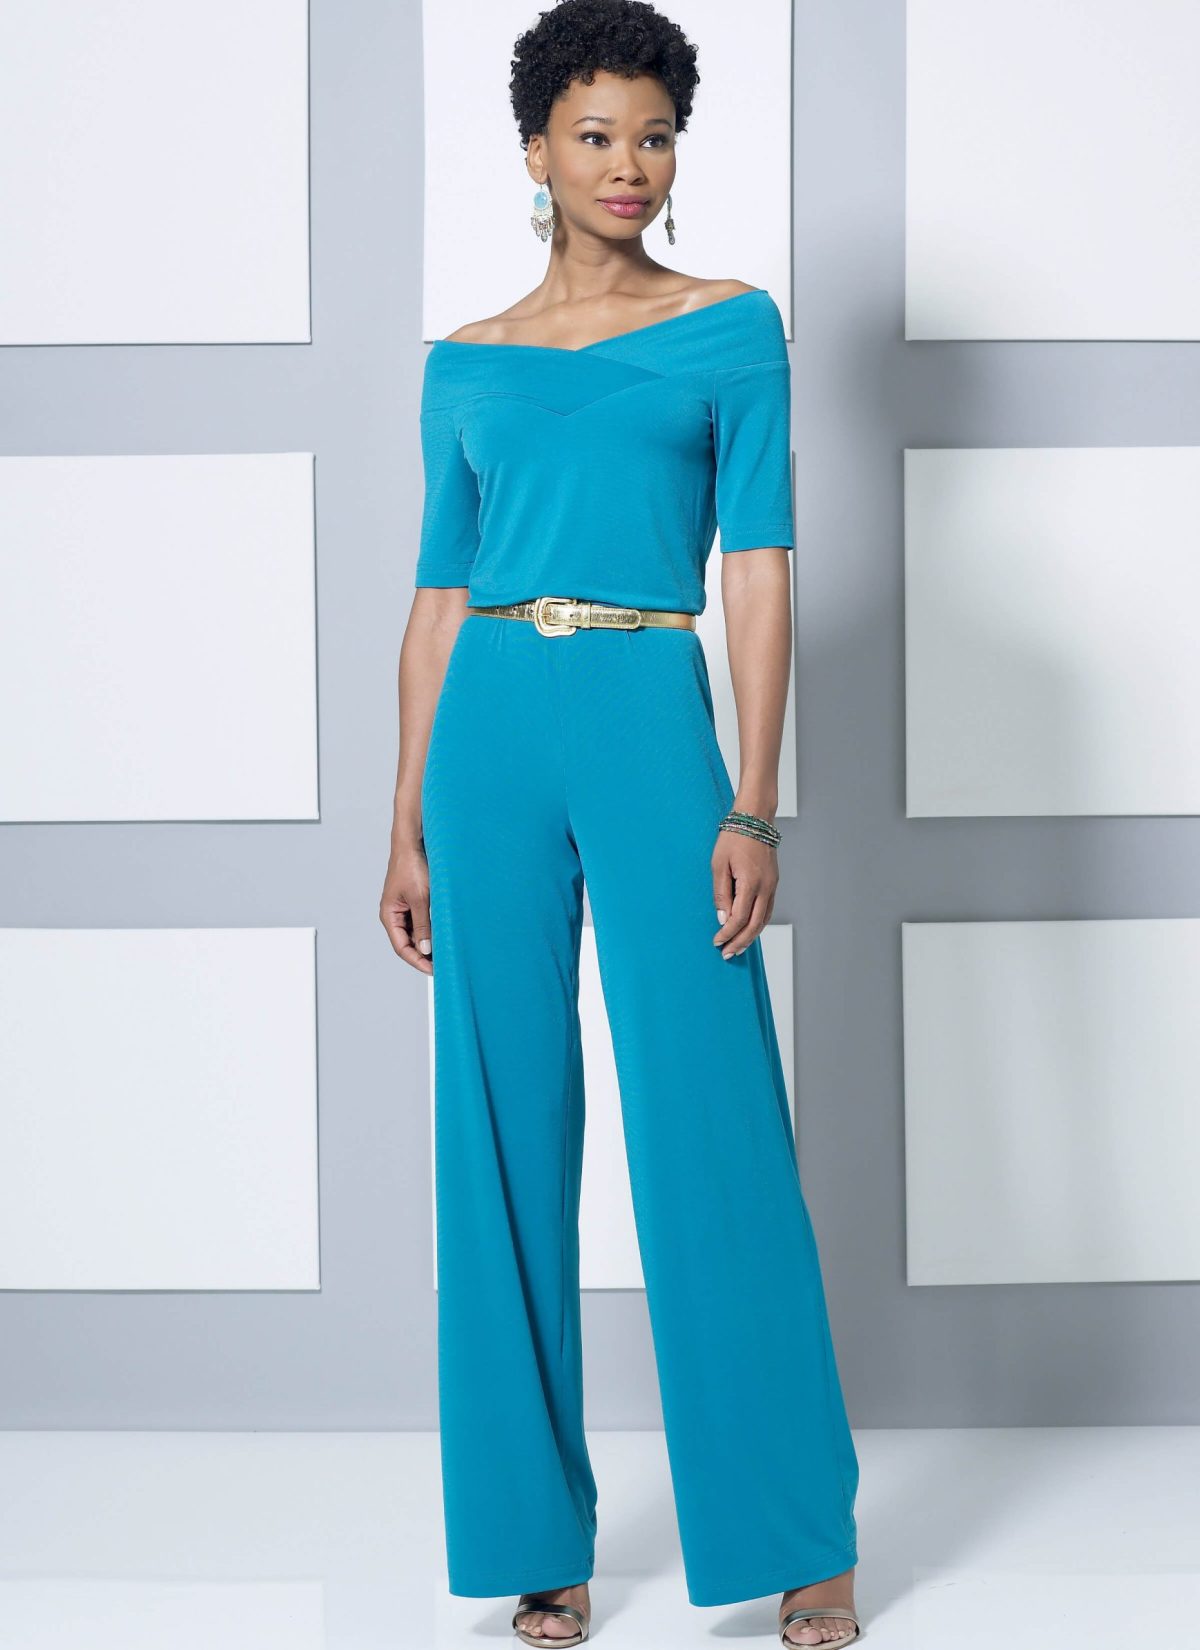 Butterick Sewing Pattern B6495 Misses' Knit Off-the-Shoulder Top, Dress and Jumpsuit, Loose Jacket, and Pull-On Pants